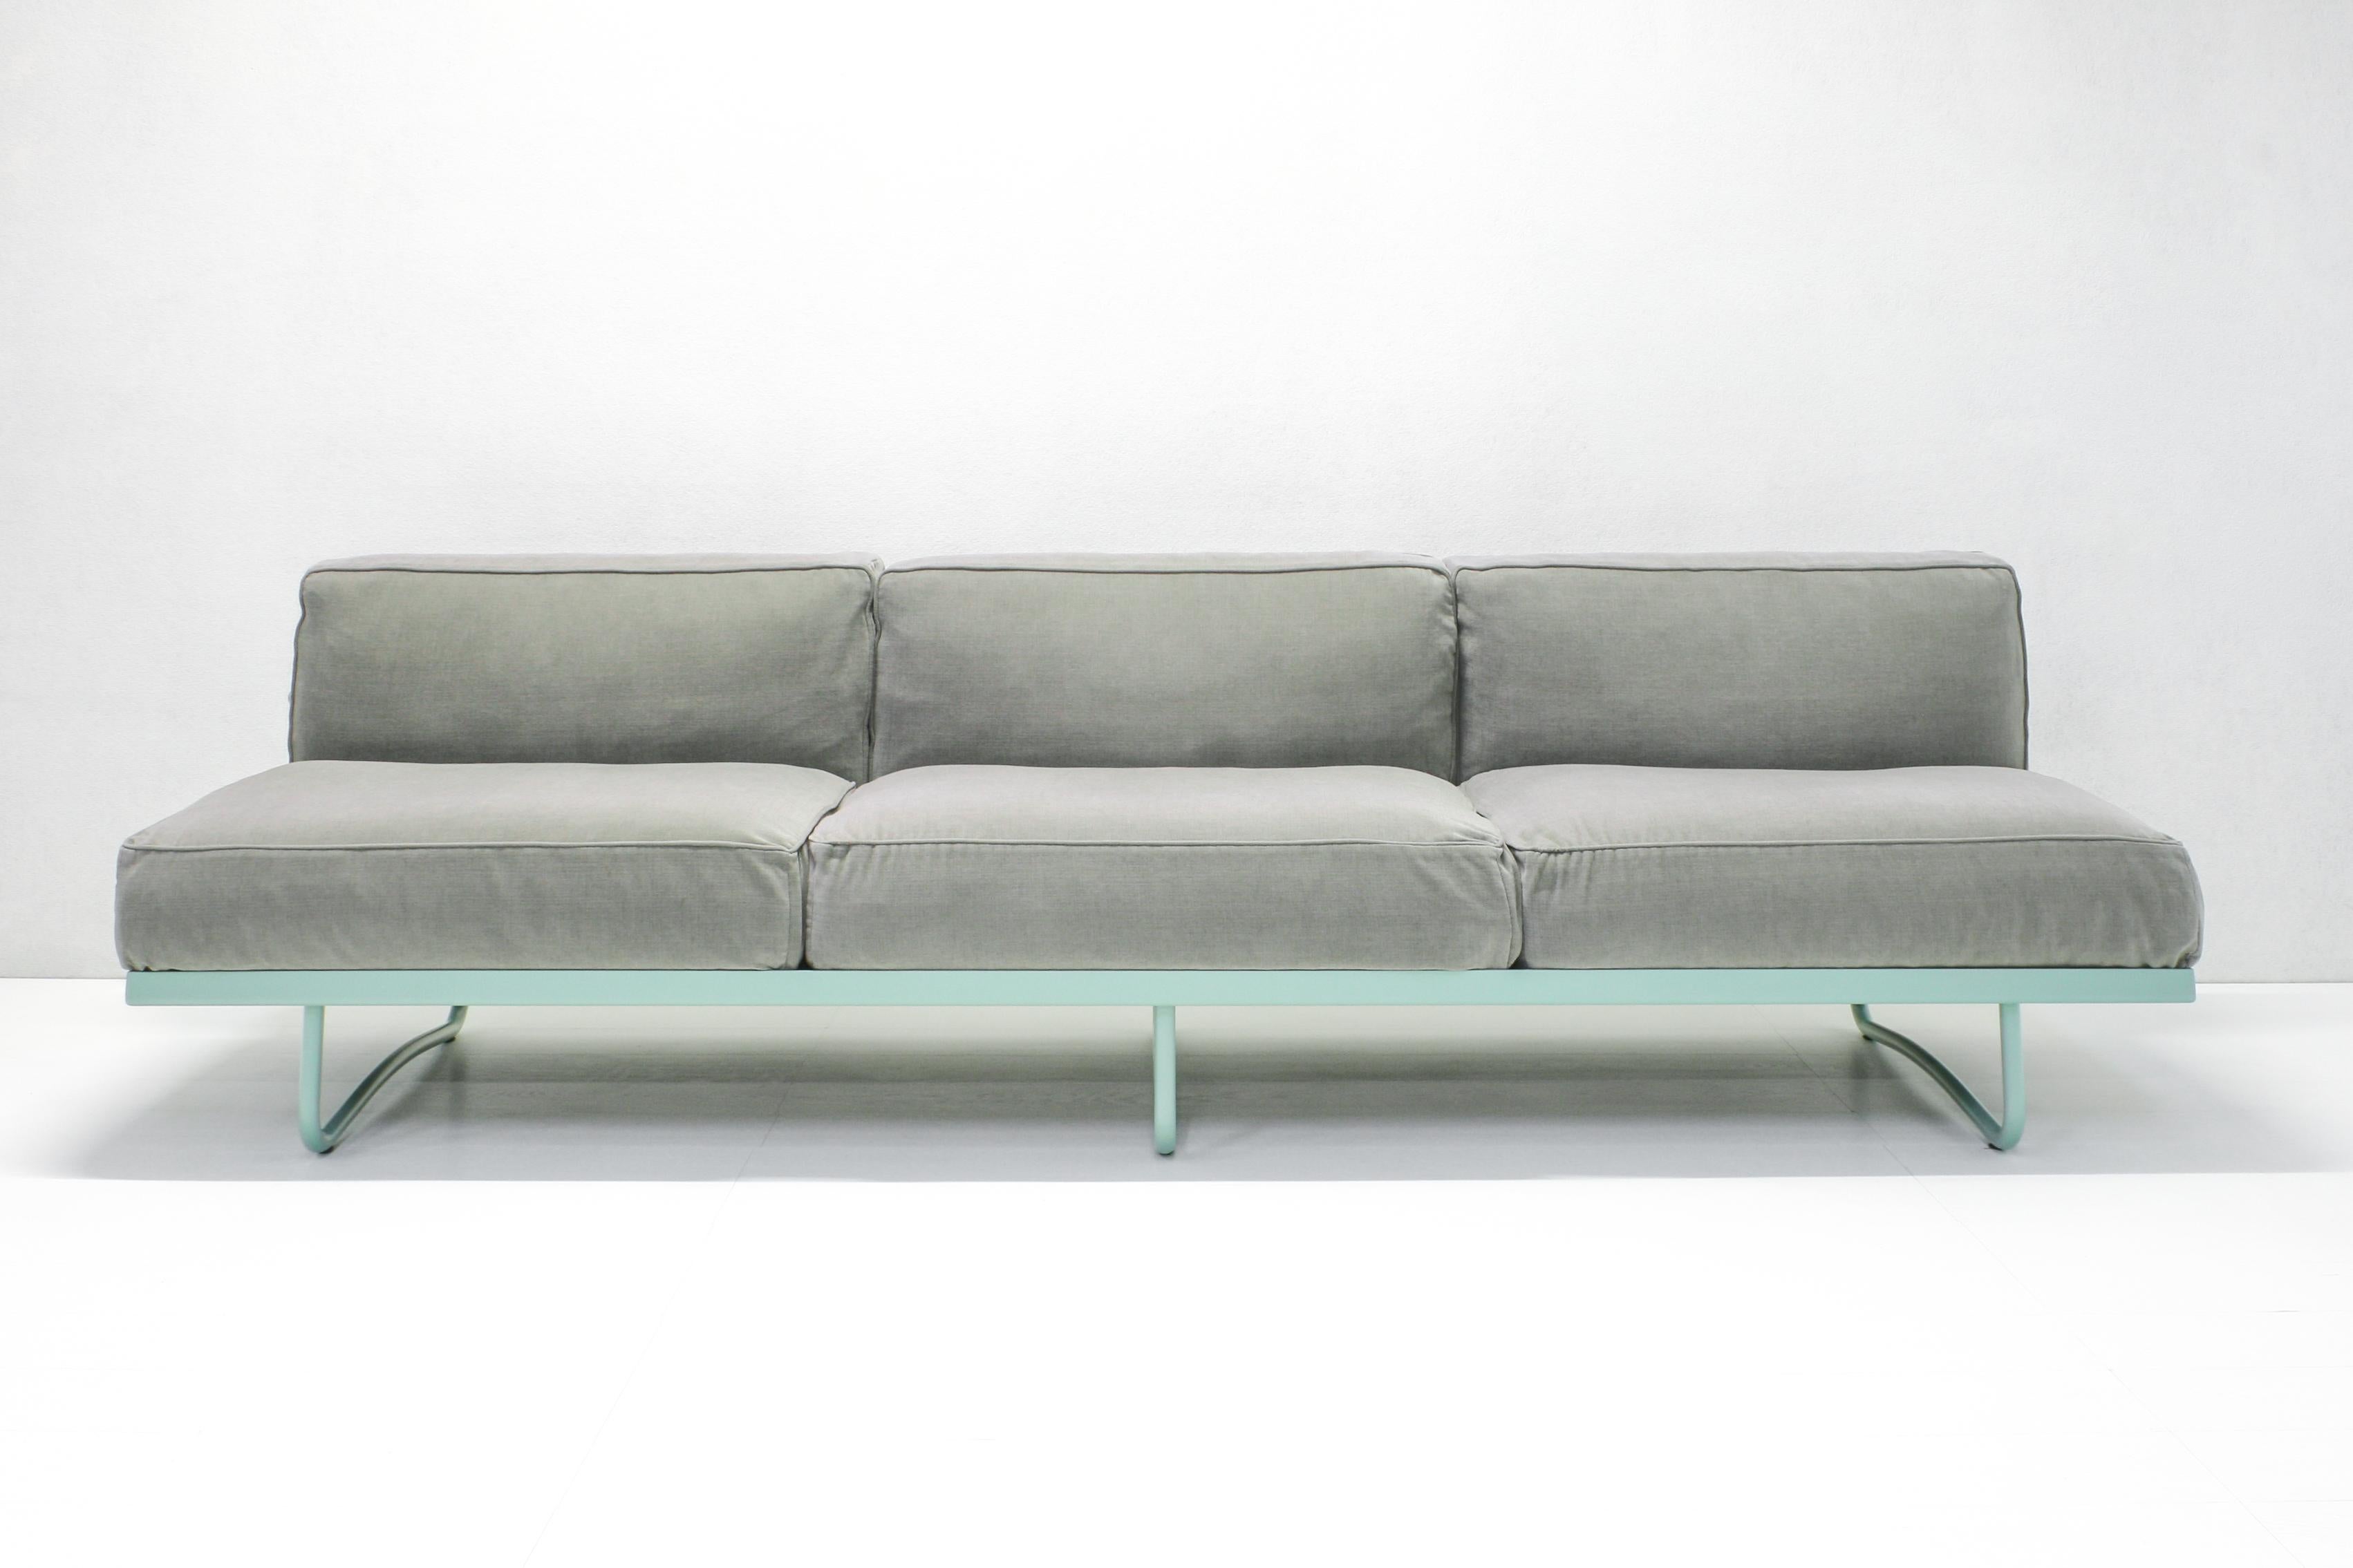 Designed in 1934 the LC5 sofa is Le Corbusier’s interpretation of the armless sofa. With its inviting design, LC5 lends casual sophistication to lounges, lobbies, and waiting areas. 
Relaunched by Cassina in 2014 in various finishes. The comfortable